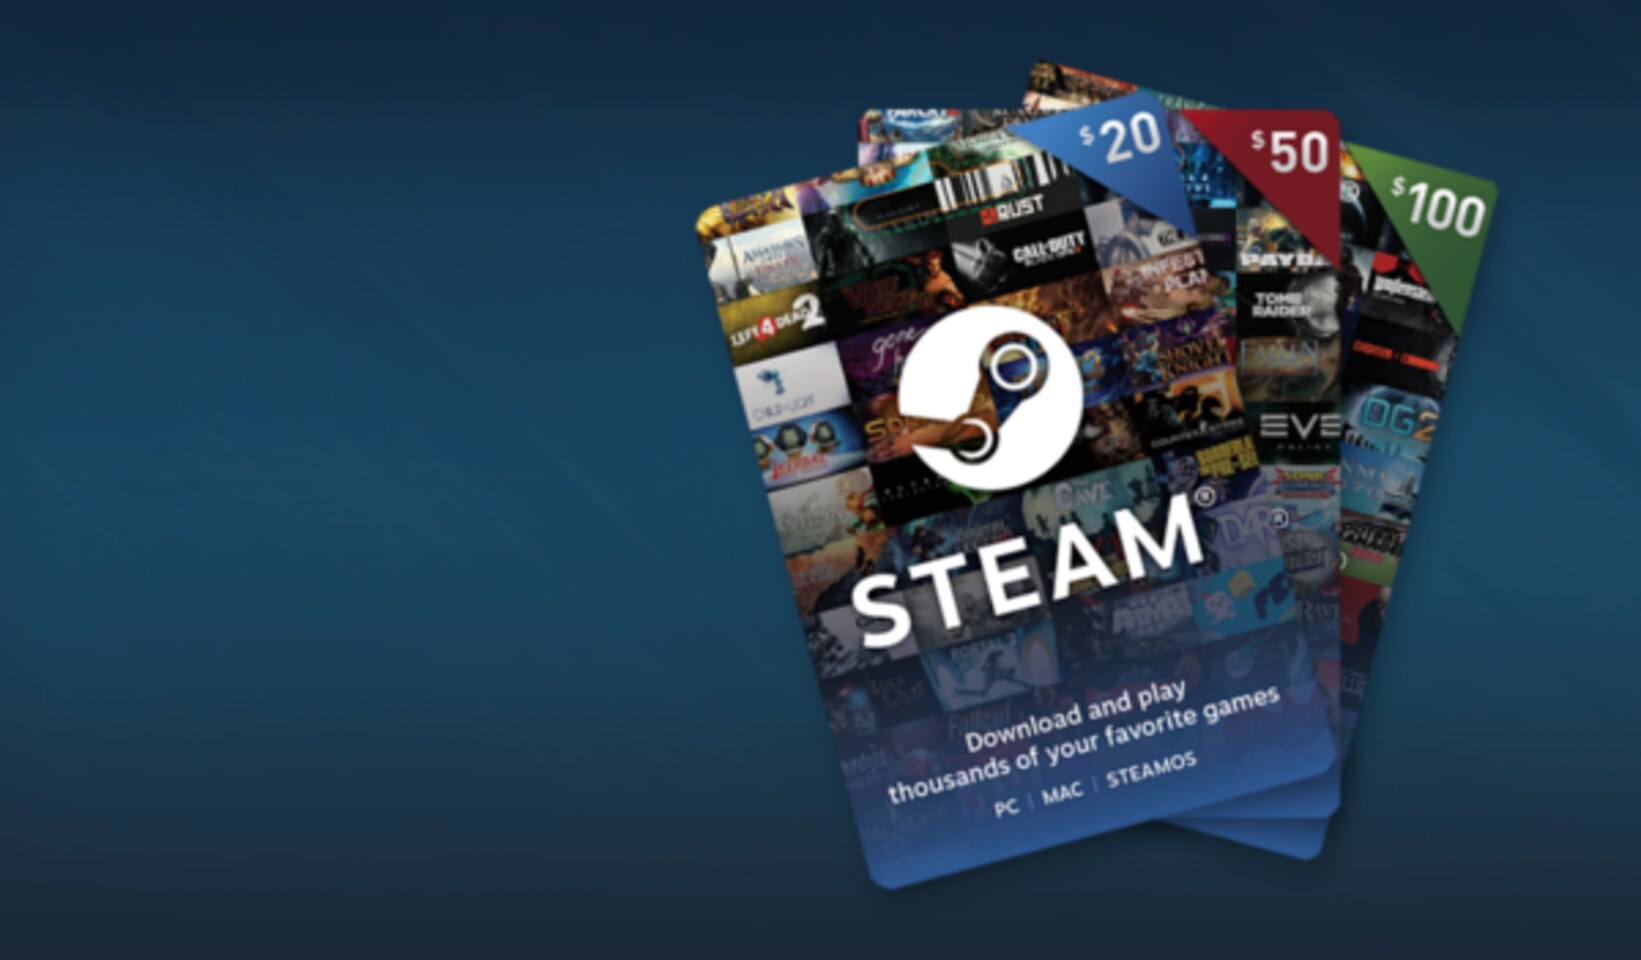 Steam Gift Card Buy USD on 20 - cheaper